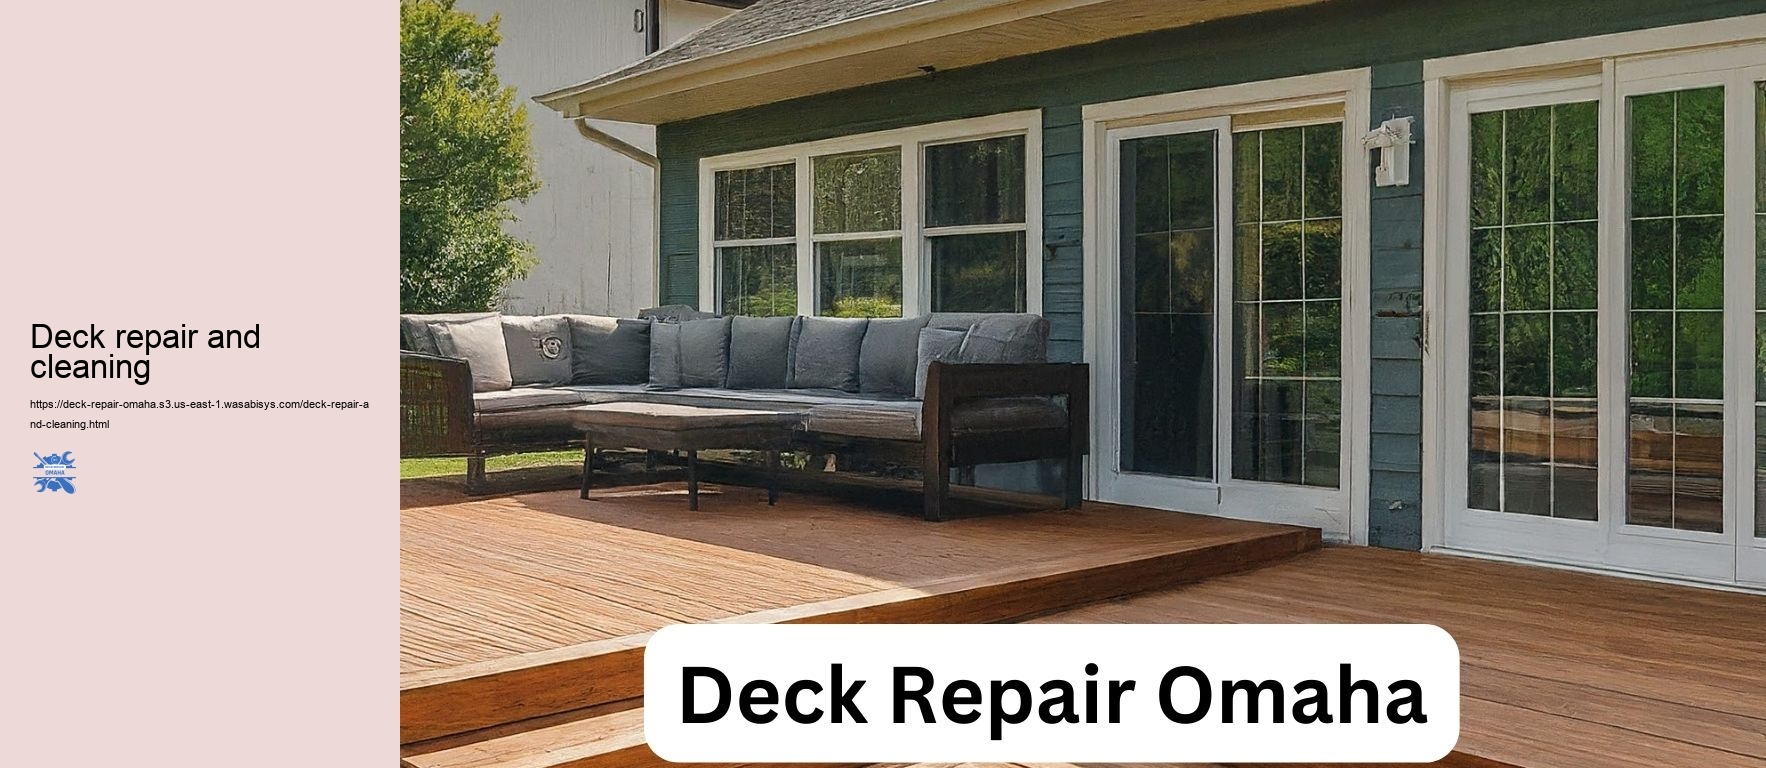 Deck repair and cleaning